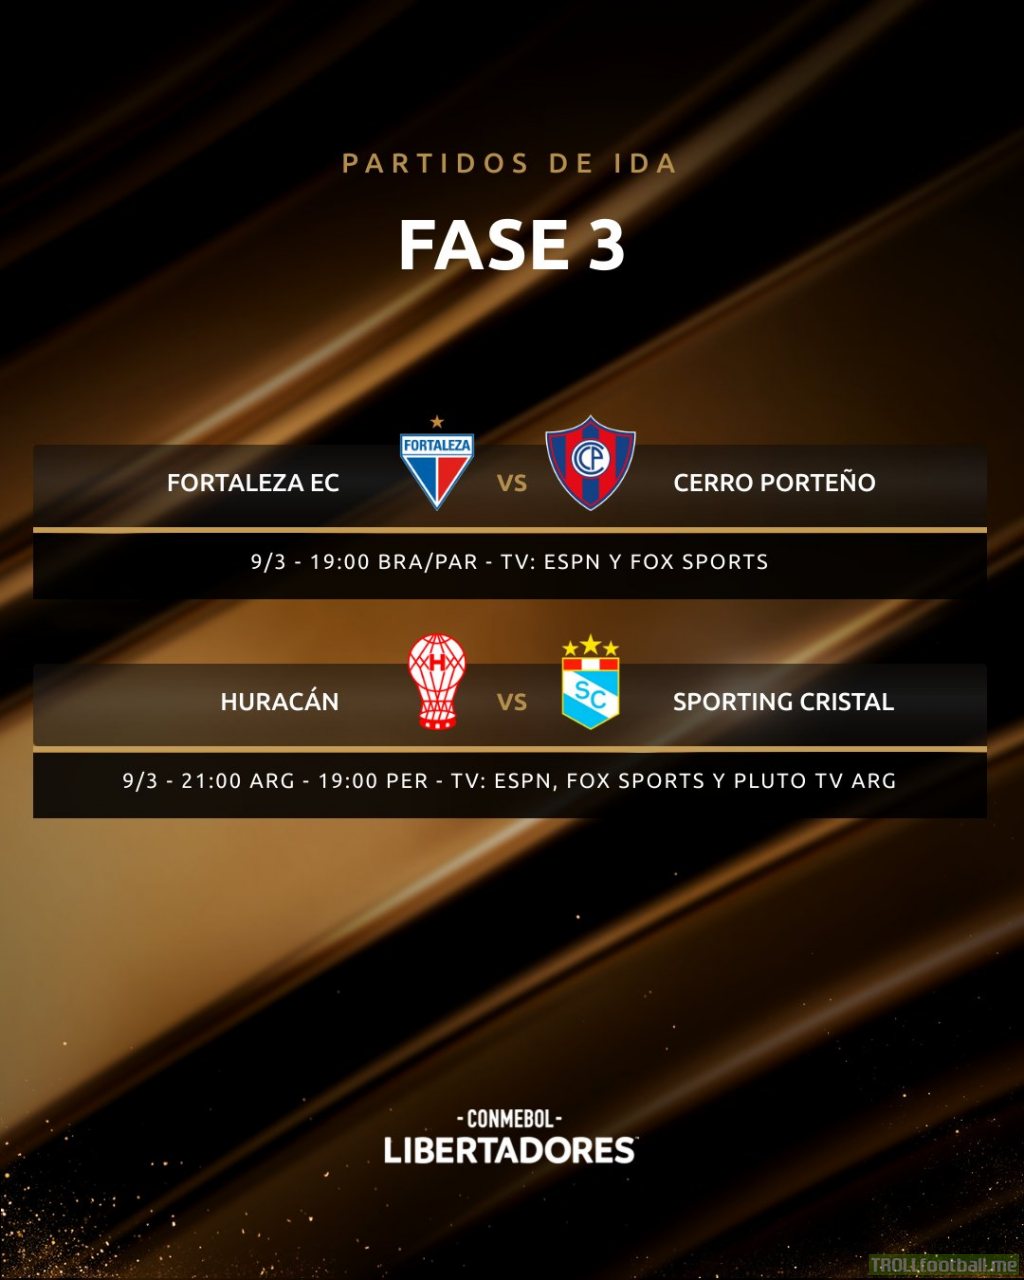 Schedule for today's Copa Libertadores stage 3 matches (1st leg)